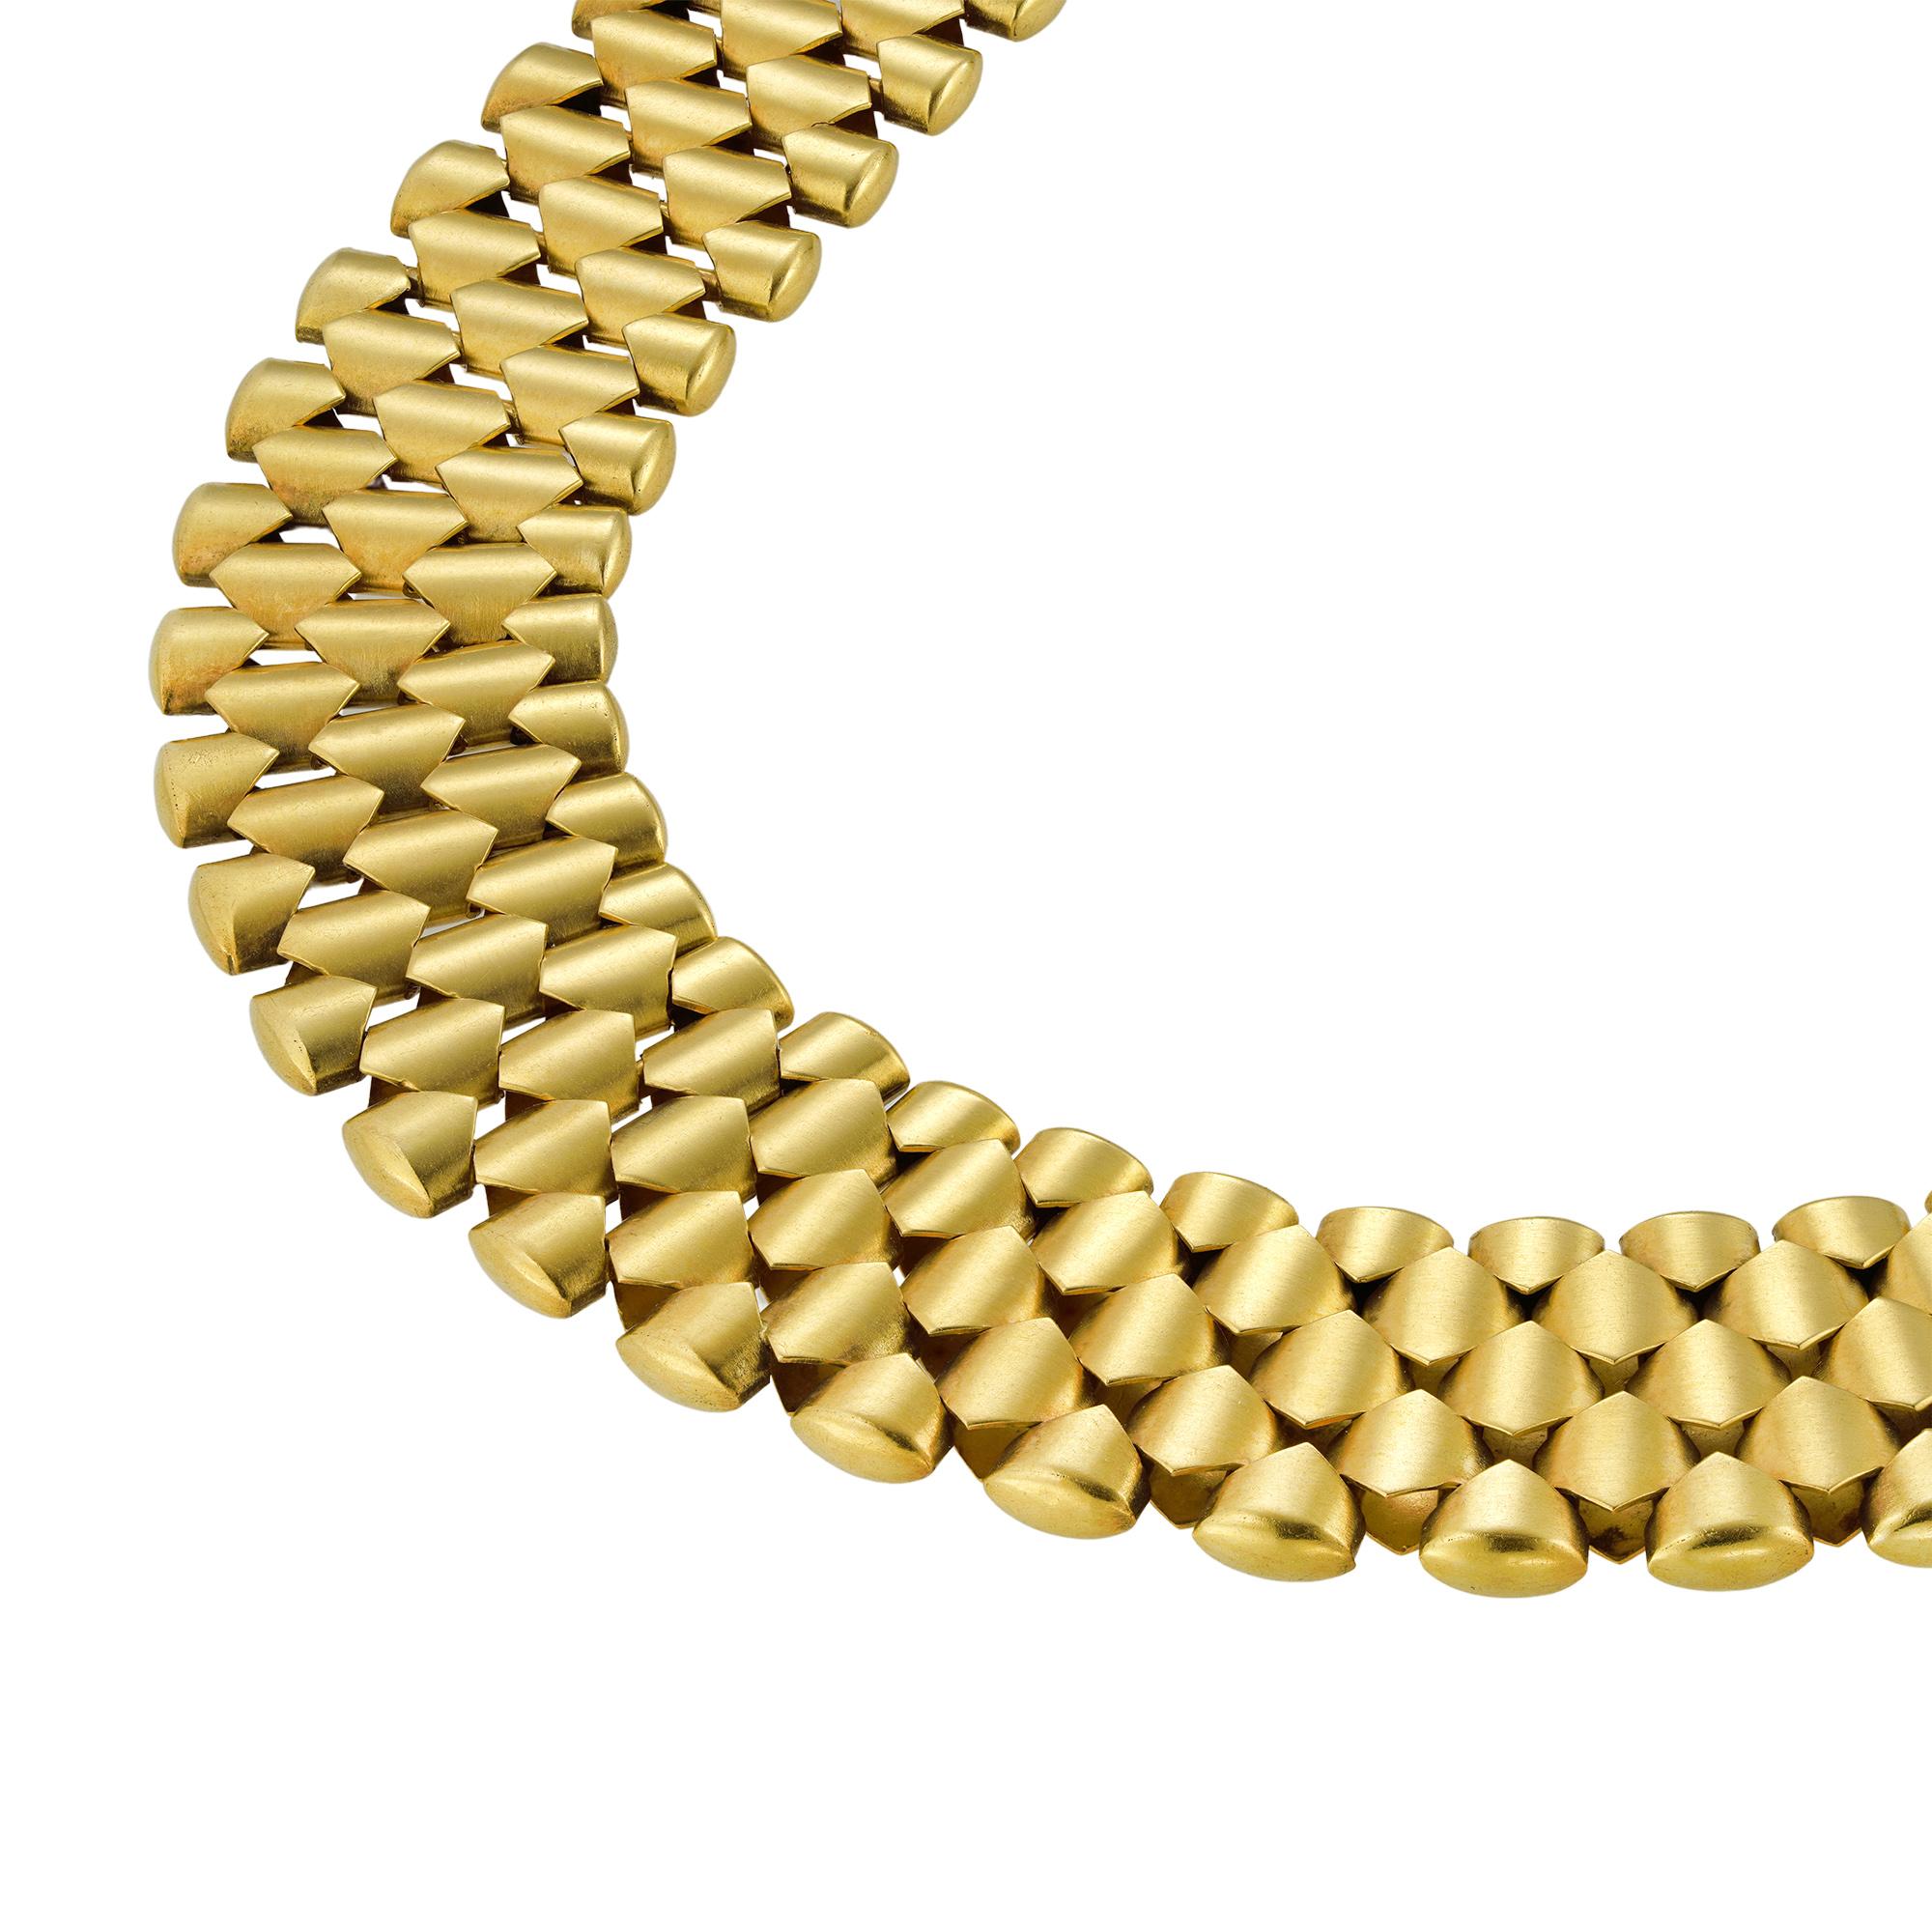 A Victorian yellow gold collar necklace, with interlocking links in diamond pattern, made in yellow gold with hidden clasp, circa 1870, unmarked, tested as 15ct gold, measuring approximately 43 x 1.7cm, gross weight 66 grams.

This antique necklace